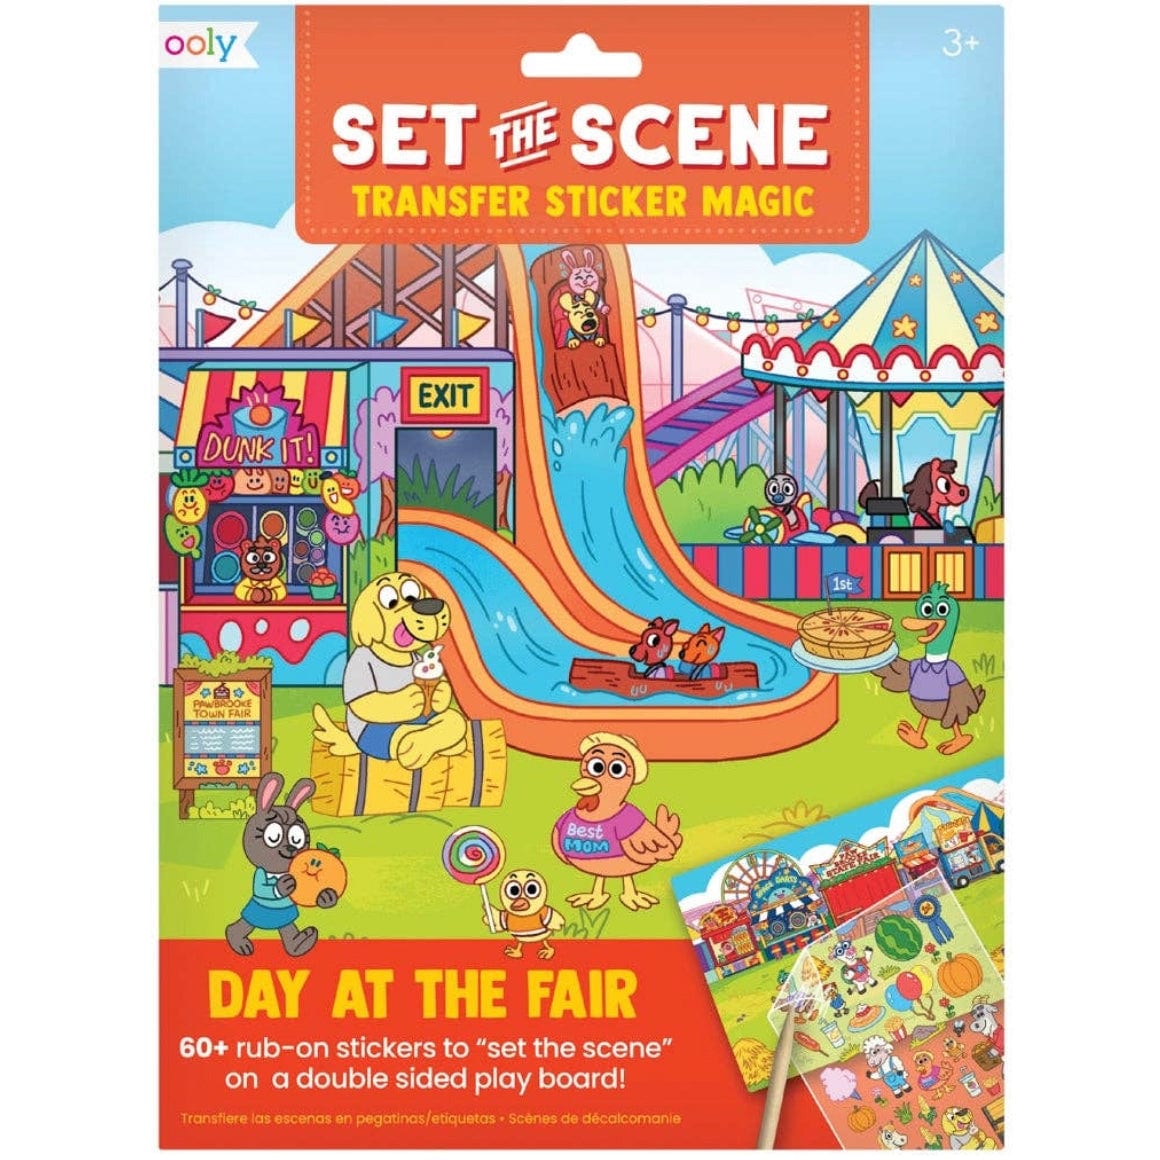 ooly Set The Scene Transfers Stickers Magic: Day at The Fair